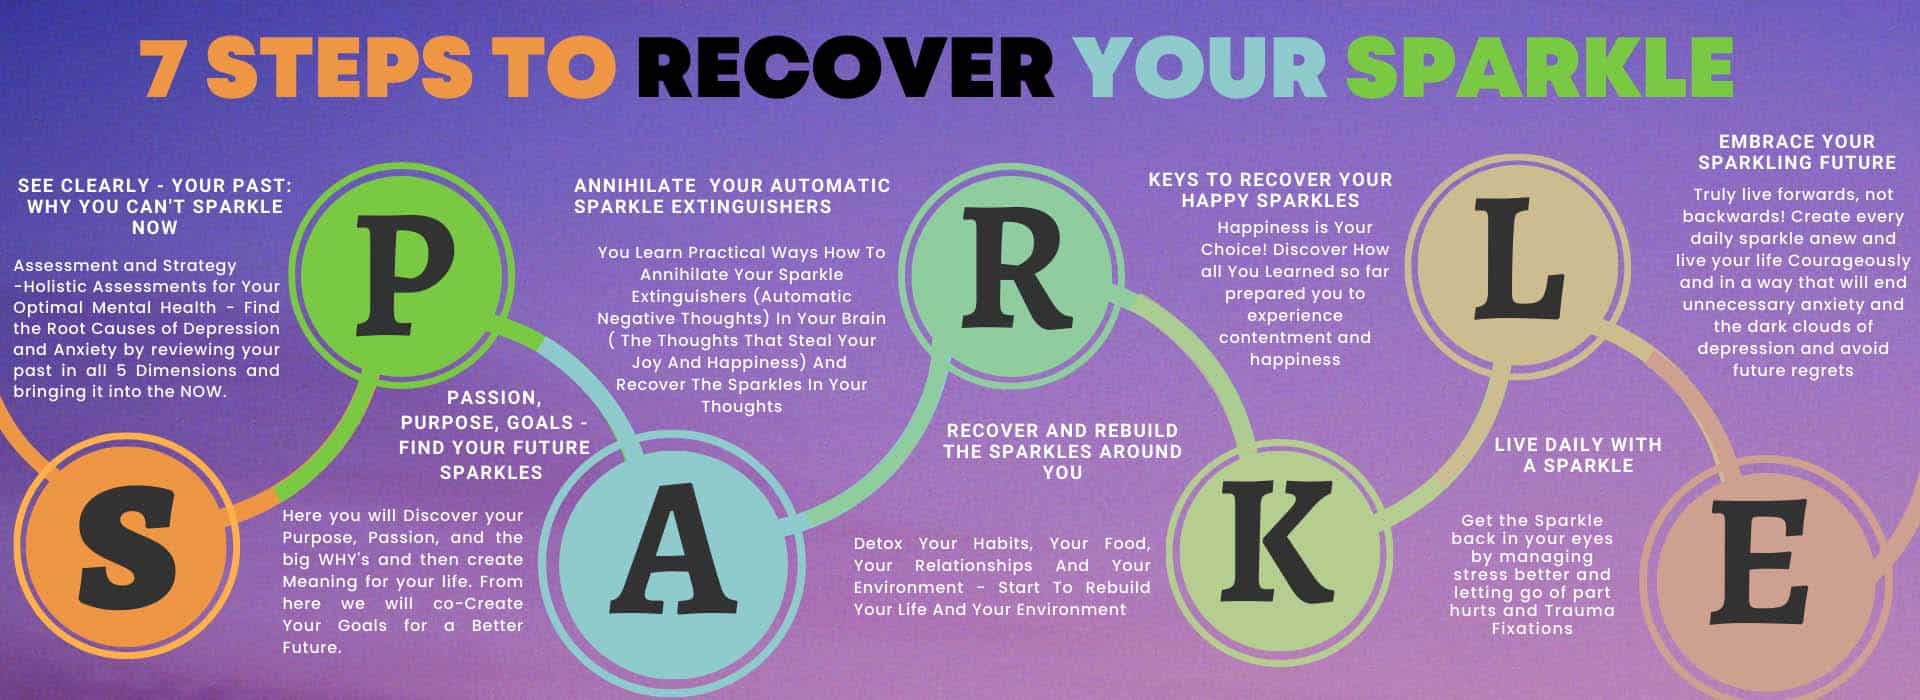 recover your sparkle-health-strategy-heal depression-anxiety-frustration-stress-mental health-brain health